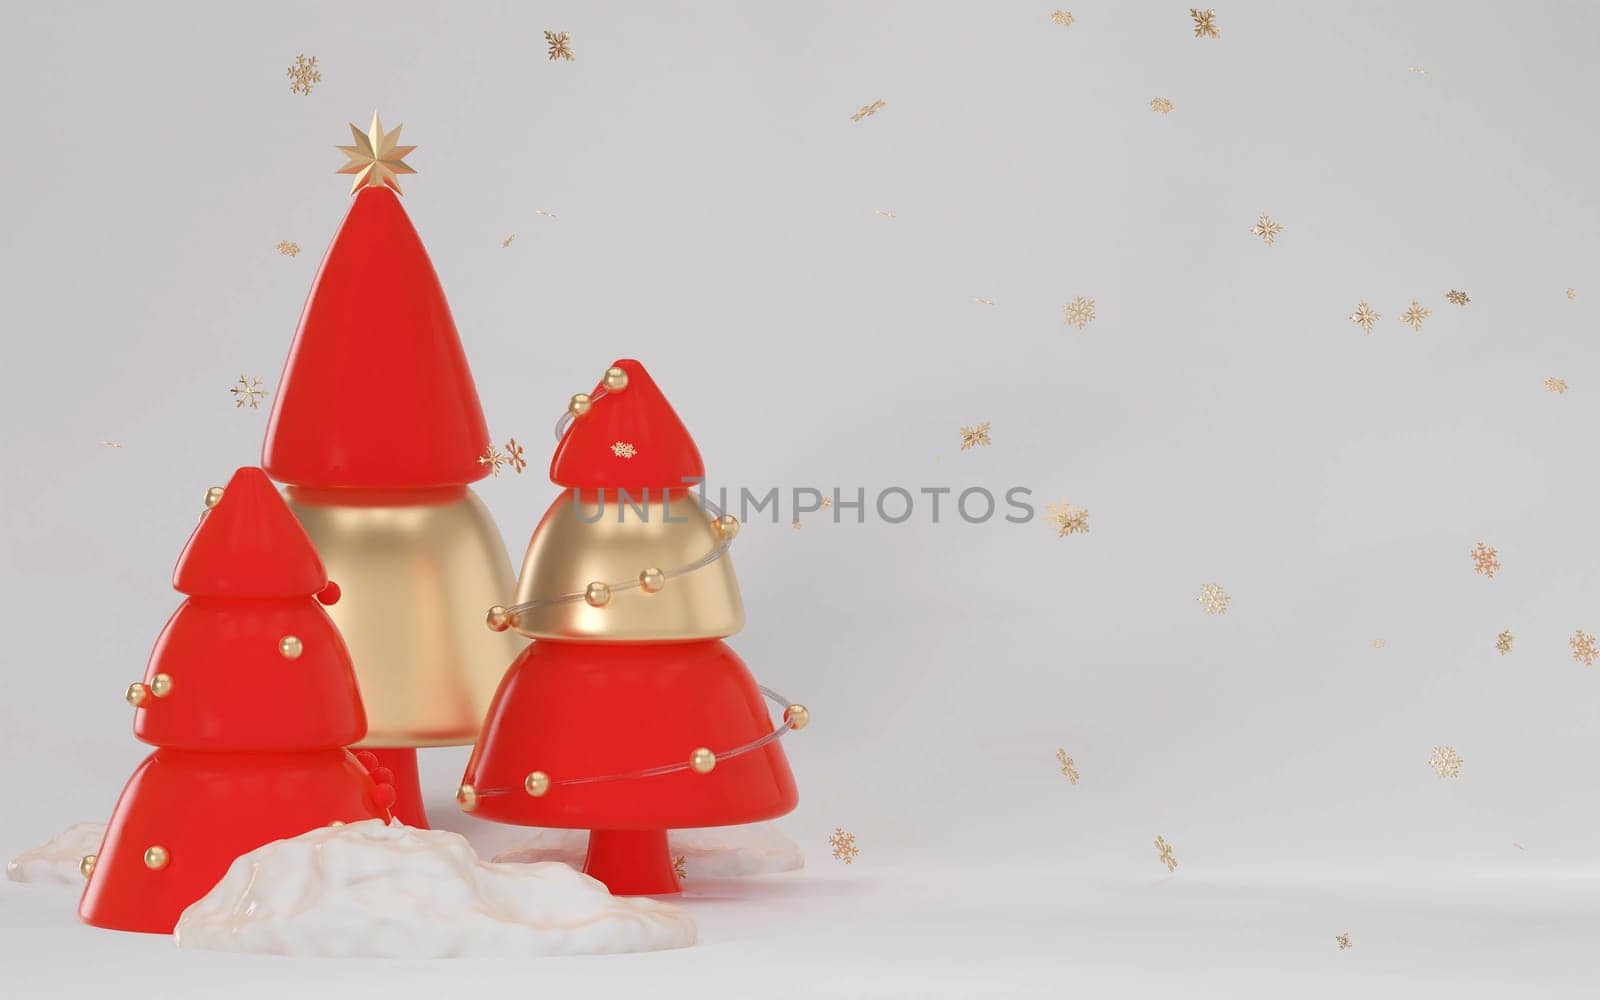 Christmas trees in snow drifts festive realistic 3d new year composition. white background. 3D rendering illustration. by meepiangraphic